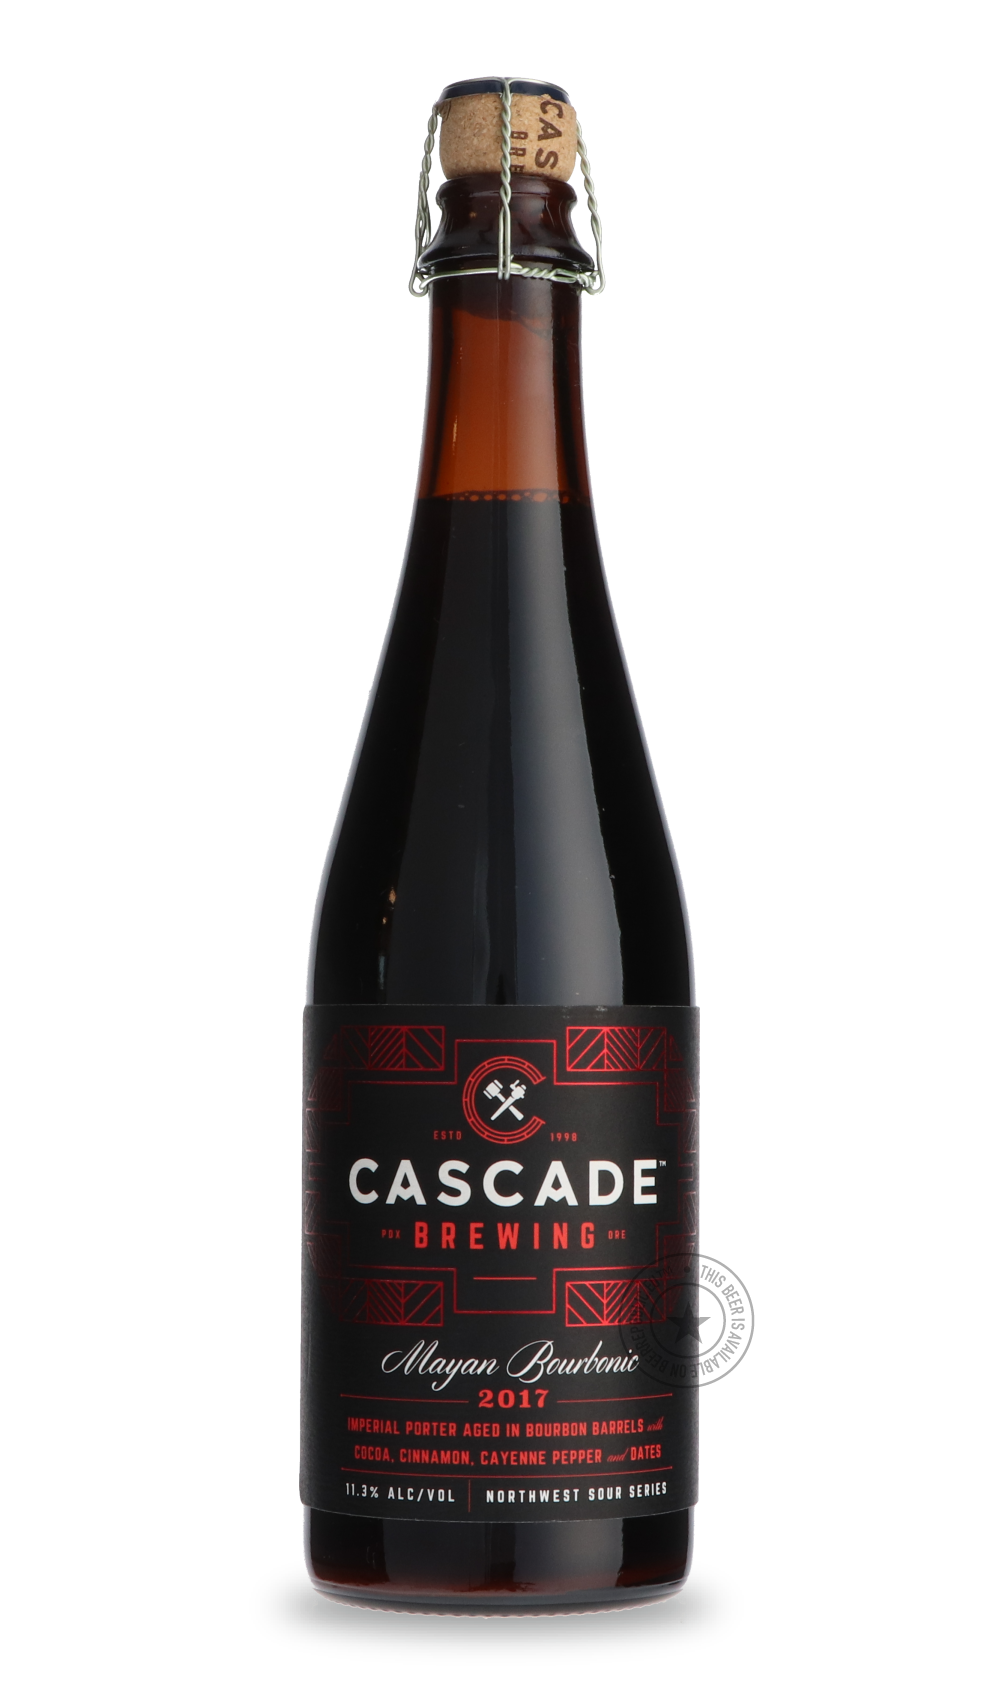 -Cascade- Mayan Bourbonic-Sour / Wild & Fruity- Only @ Beer Republic - The best online beer store for American & Canadian craft beer - Buy beer online from the USA and Canada - Bier online kopen - Amerikaans bier kopen - Craft beer store - Craft beer kopen - Amerikanisch bier kaufen - Bier online kaufen - Acheter biere online - IPA - Stout - Porter - New England IPA - Hazy IPA - Imperial Stout - Barrel Aged - Barrel Aged Imperial Stout - Brown - Dark beer - Blond - Blonde - Pilsner - Lager - Wheat - Weizen 